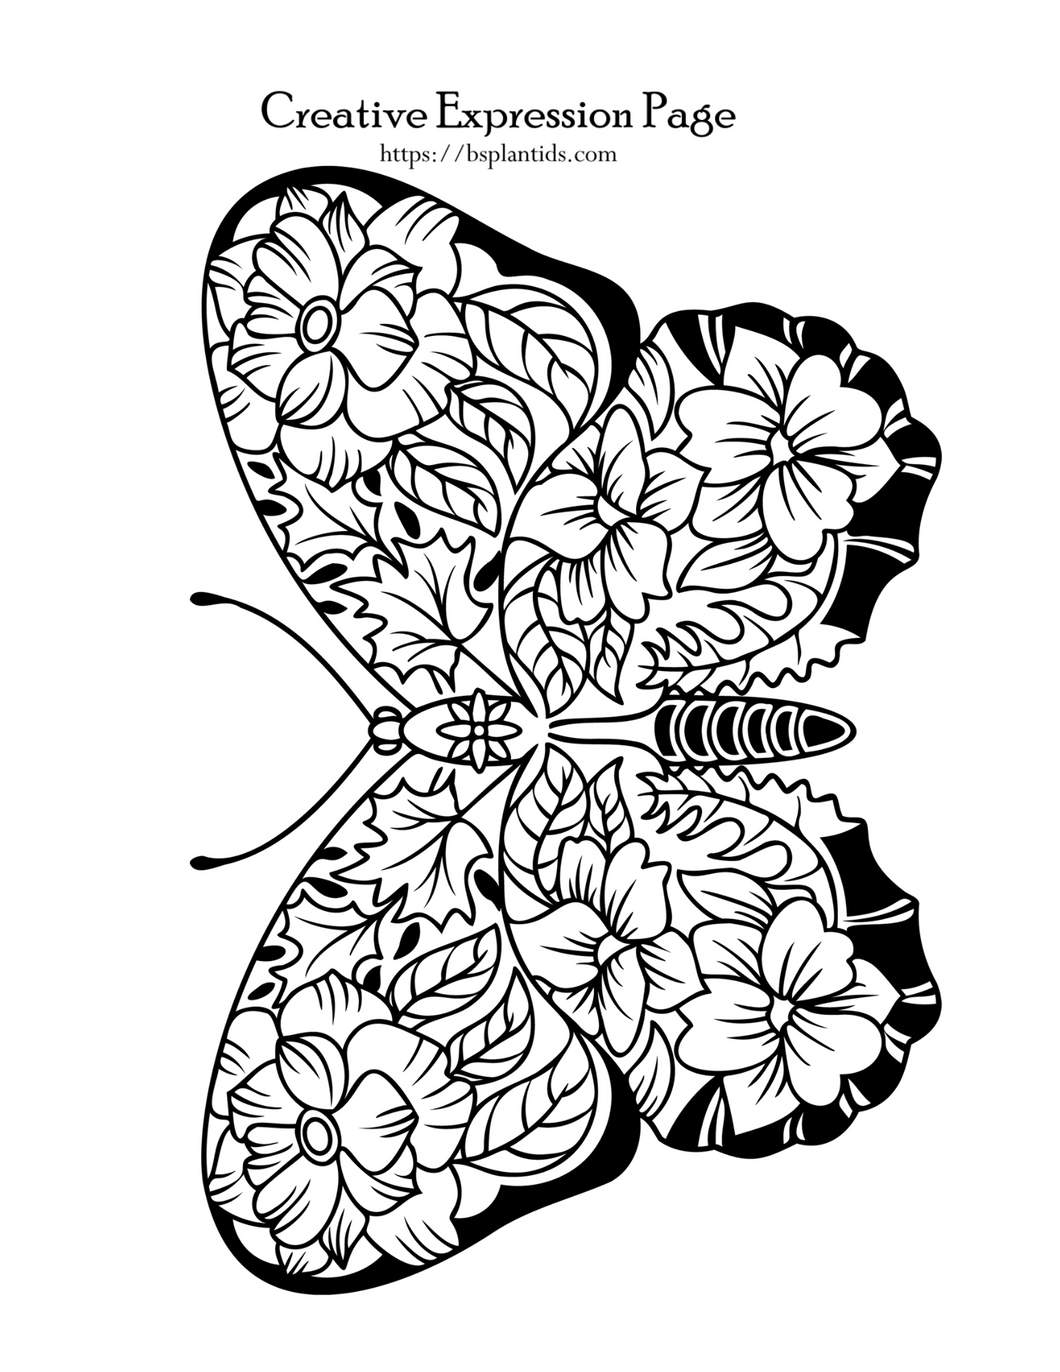 Butterfly Creative Expression Page